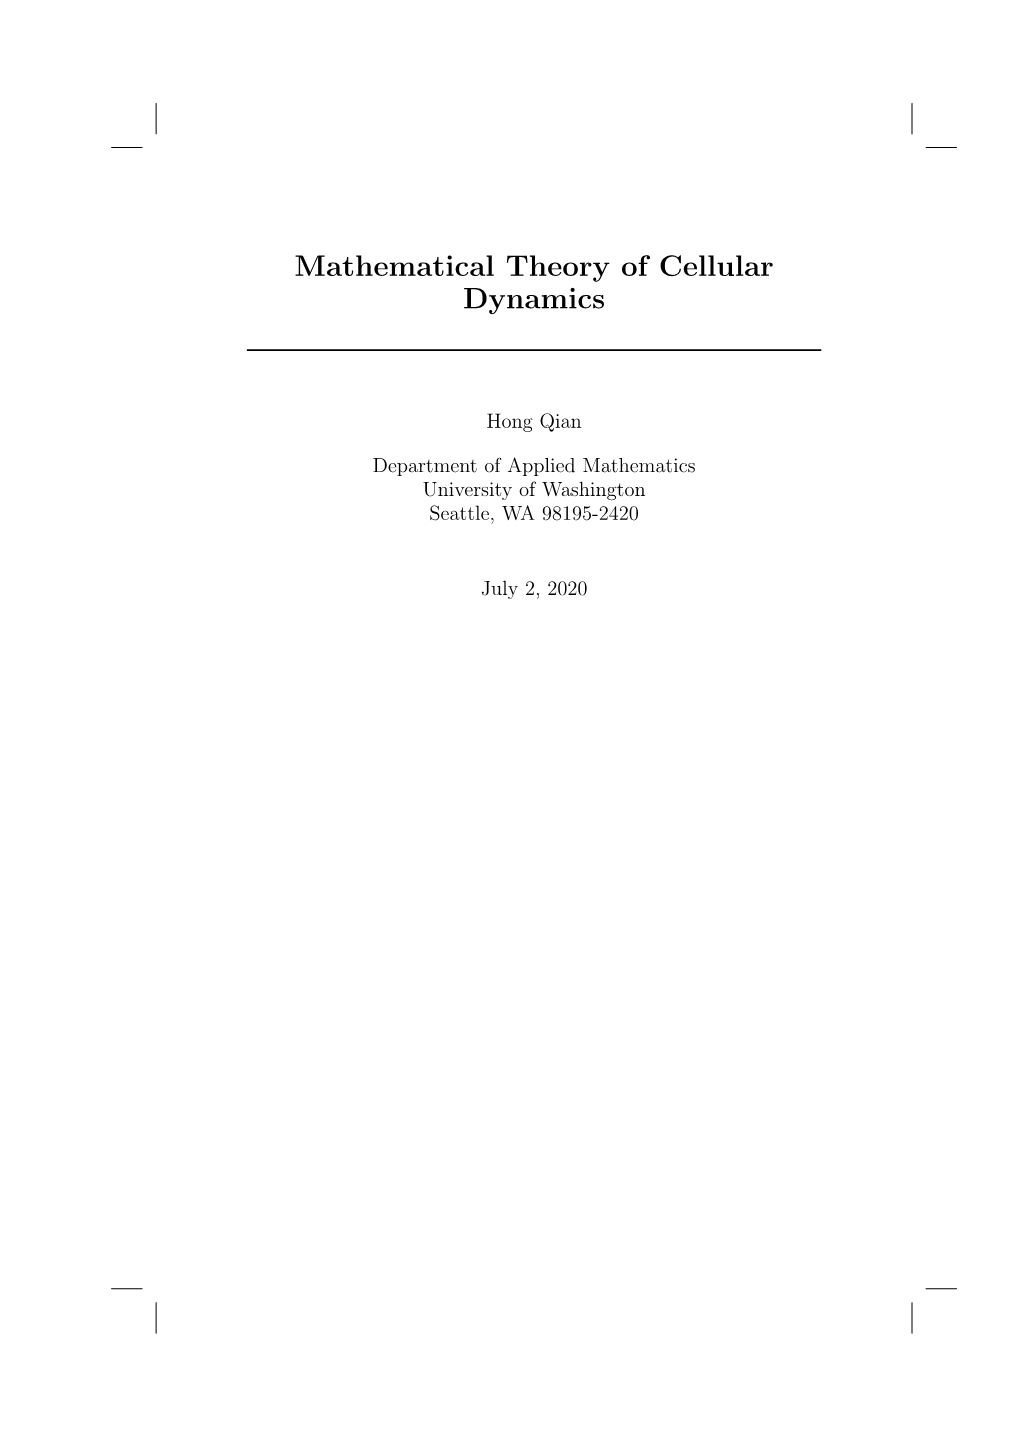 Mathematical Theory of Cellular Dynamics